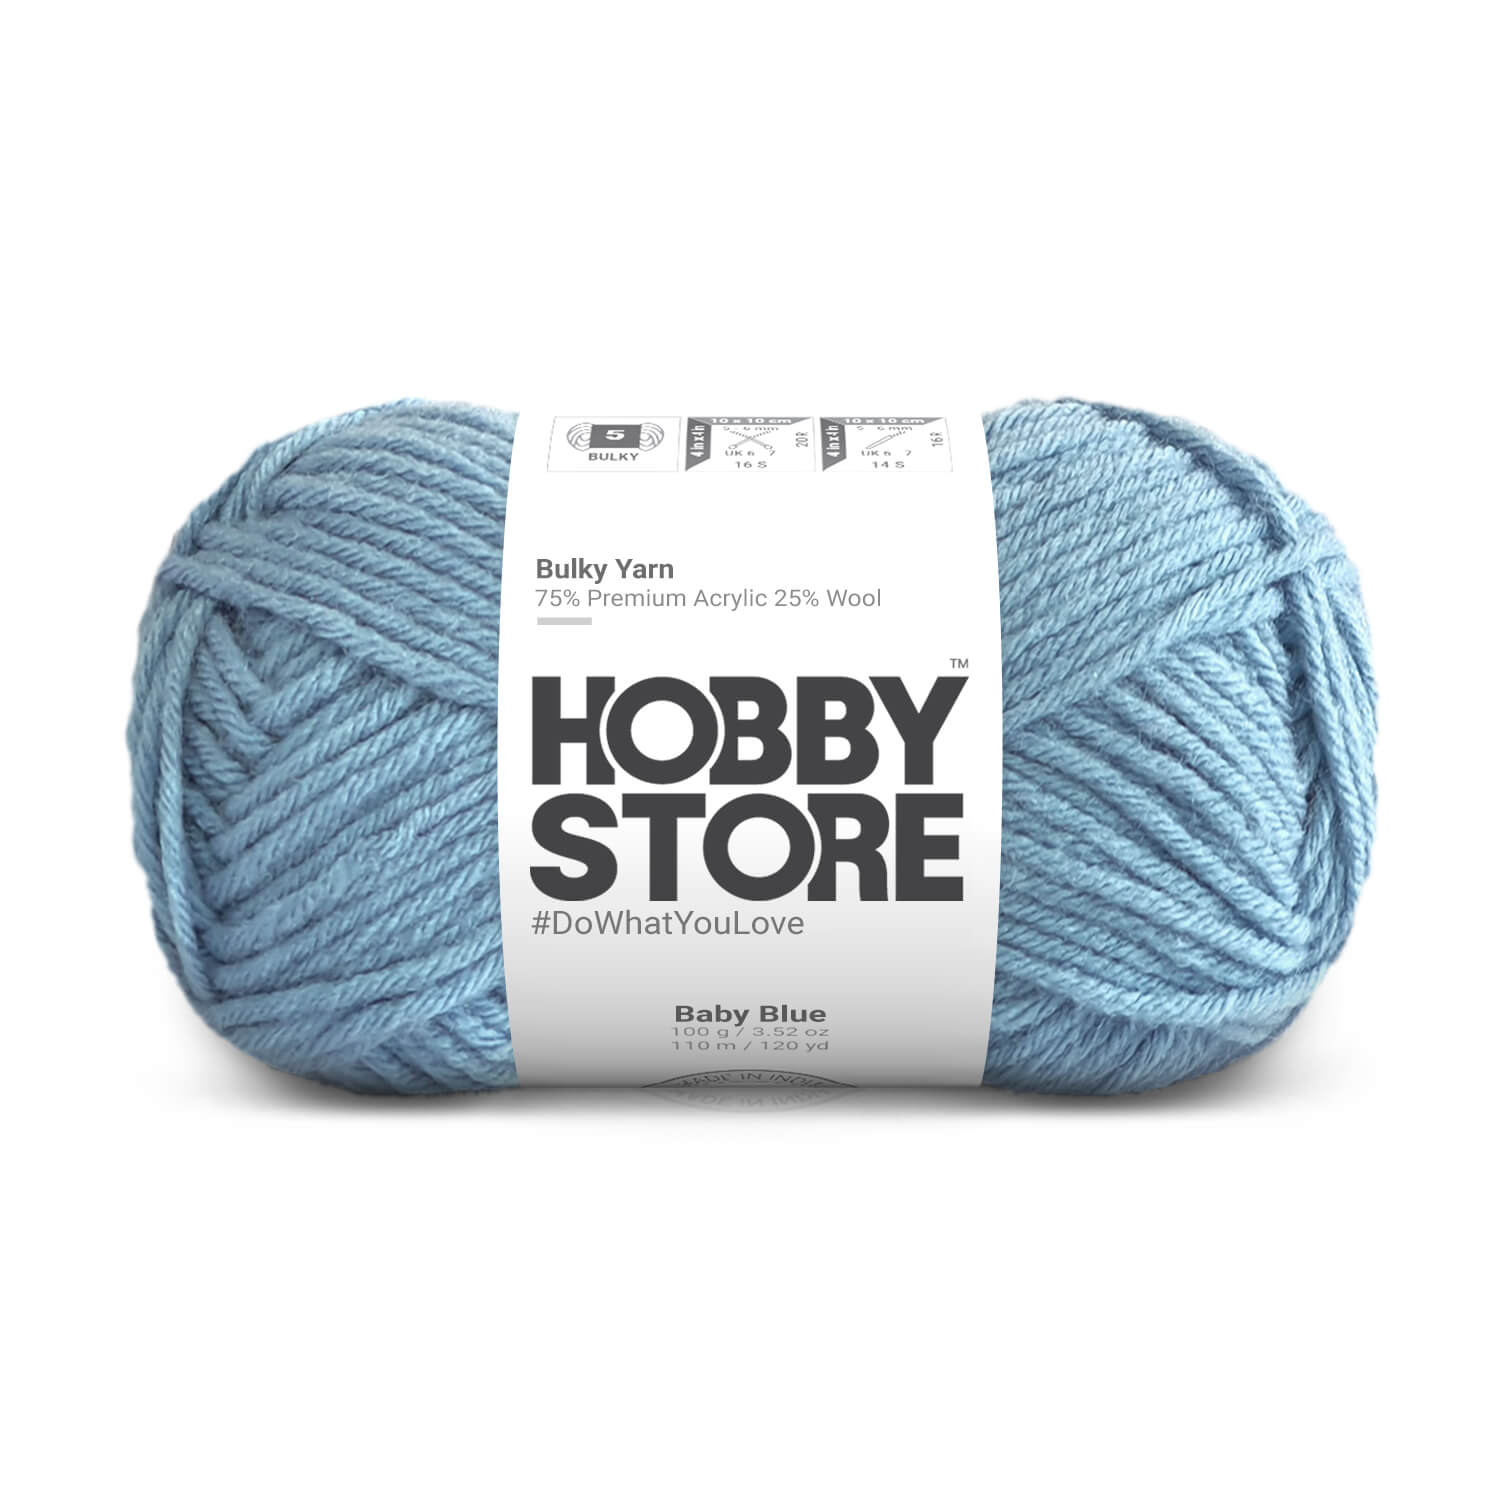 Bulky Yarn by Hobby Store - Baby Blue 6032